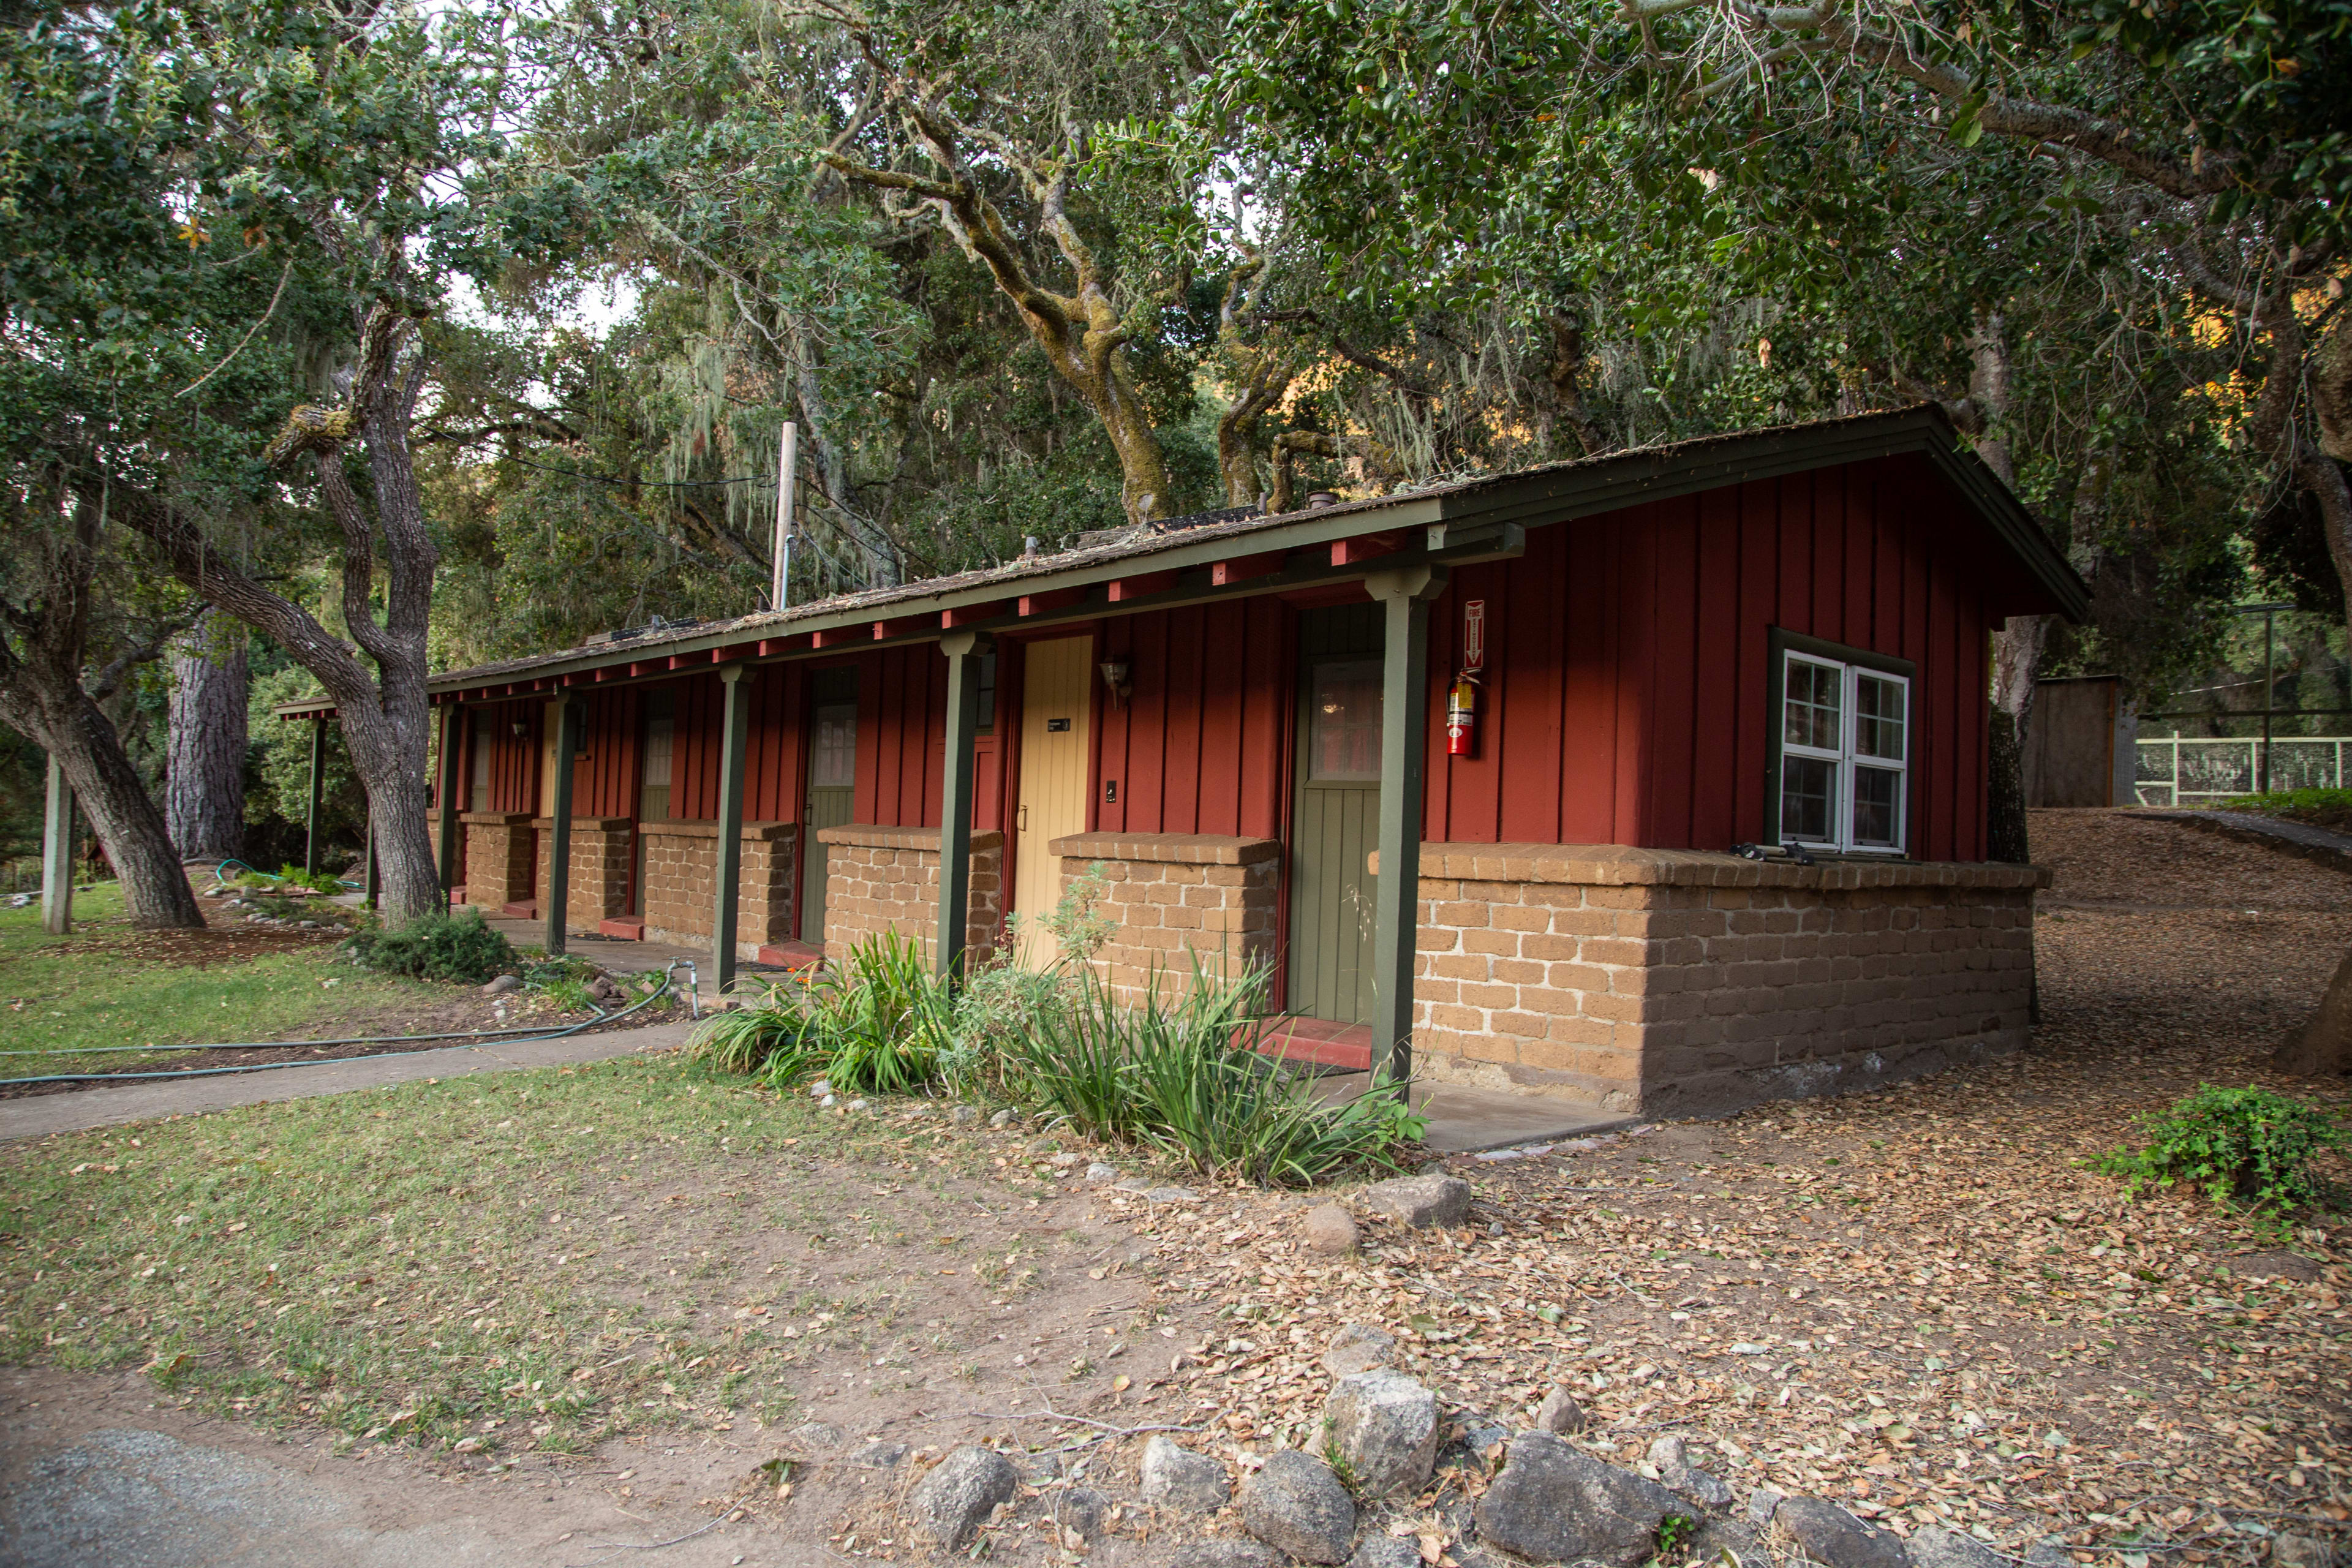 Exterior of bunk house